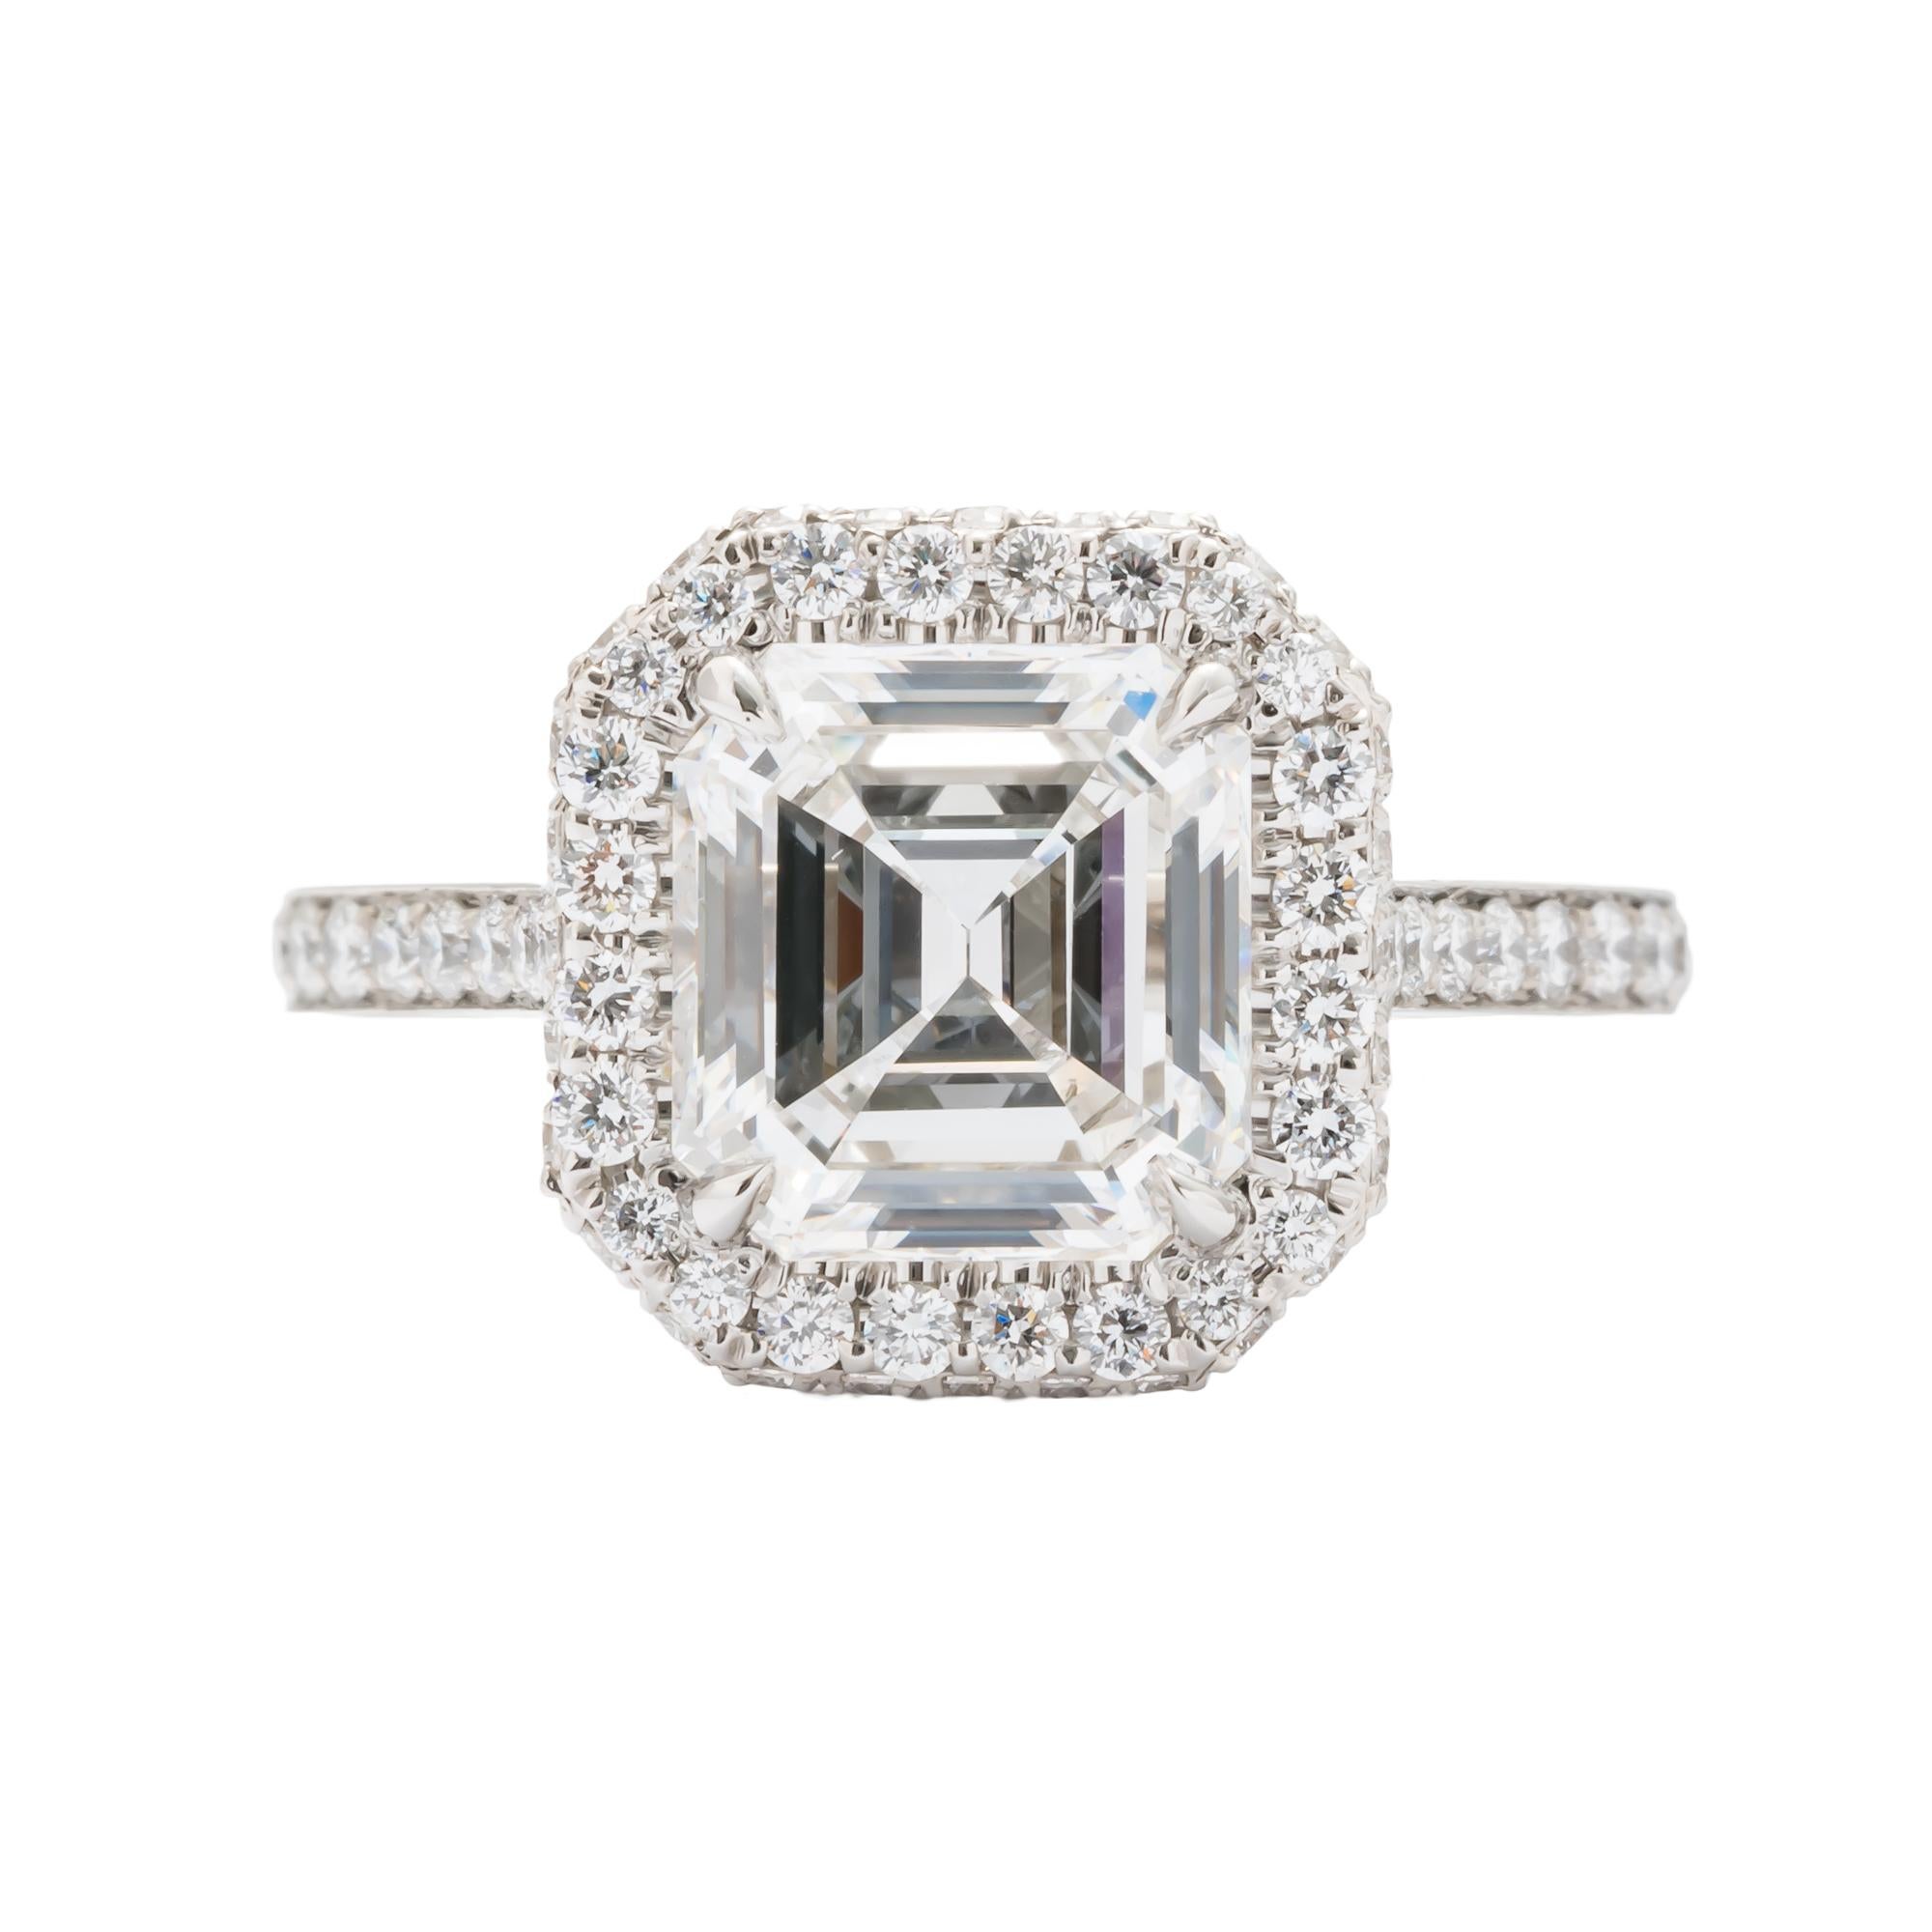 Platinum halo ring consisting of 1 emerald cut diamond weighing 2.74 carats with color and clarity of E/SI1 GIA#2193177533 surrounded by 88 round diamonds also set halfway down shank weighing a total of .84 carats. Size 6.5